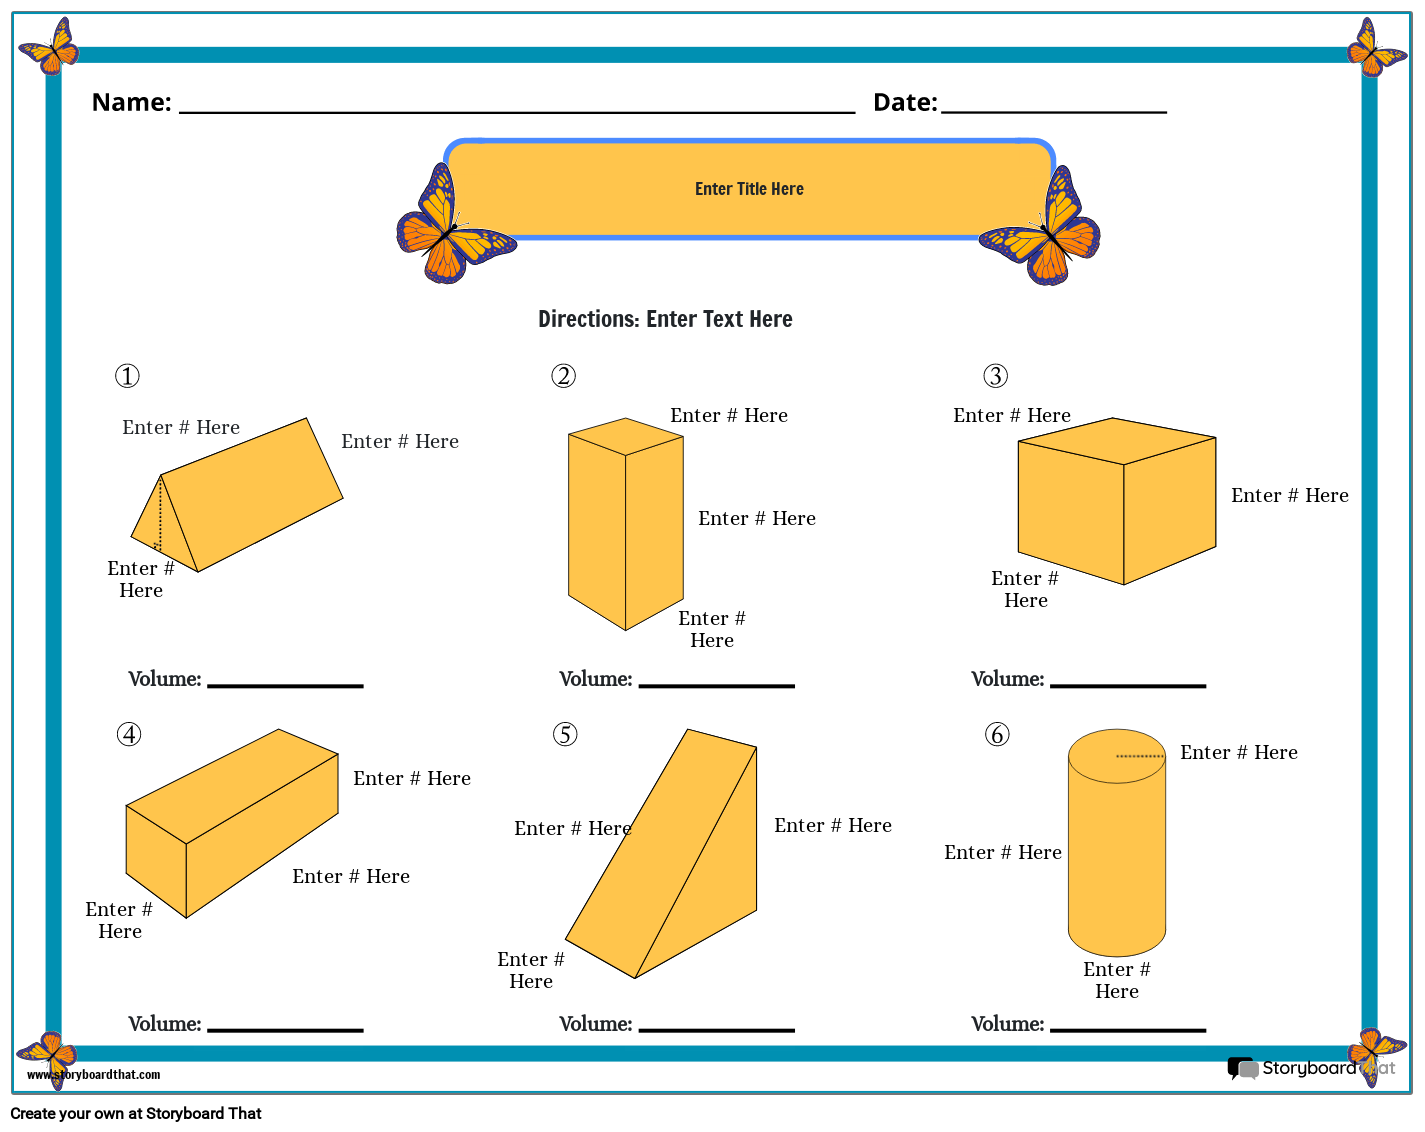 Rectangular prisms and other shapes - volume